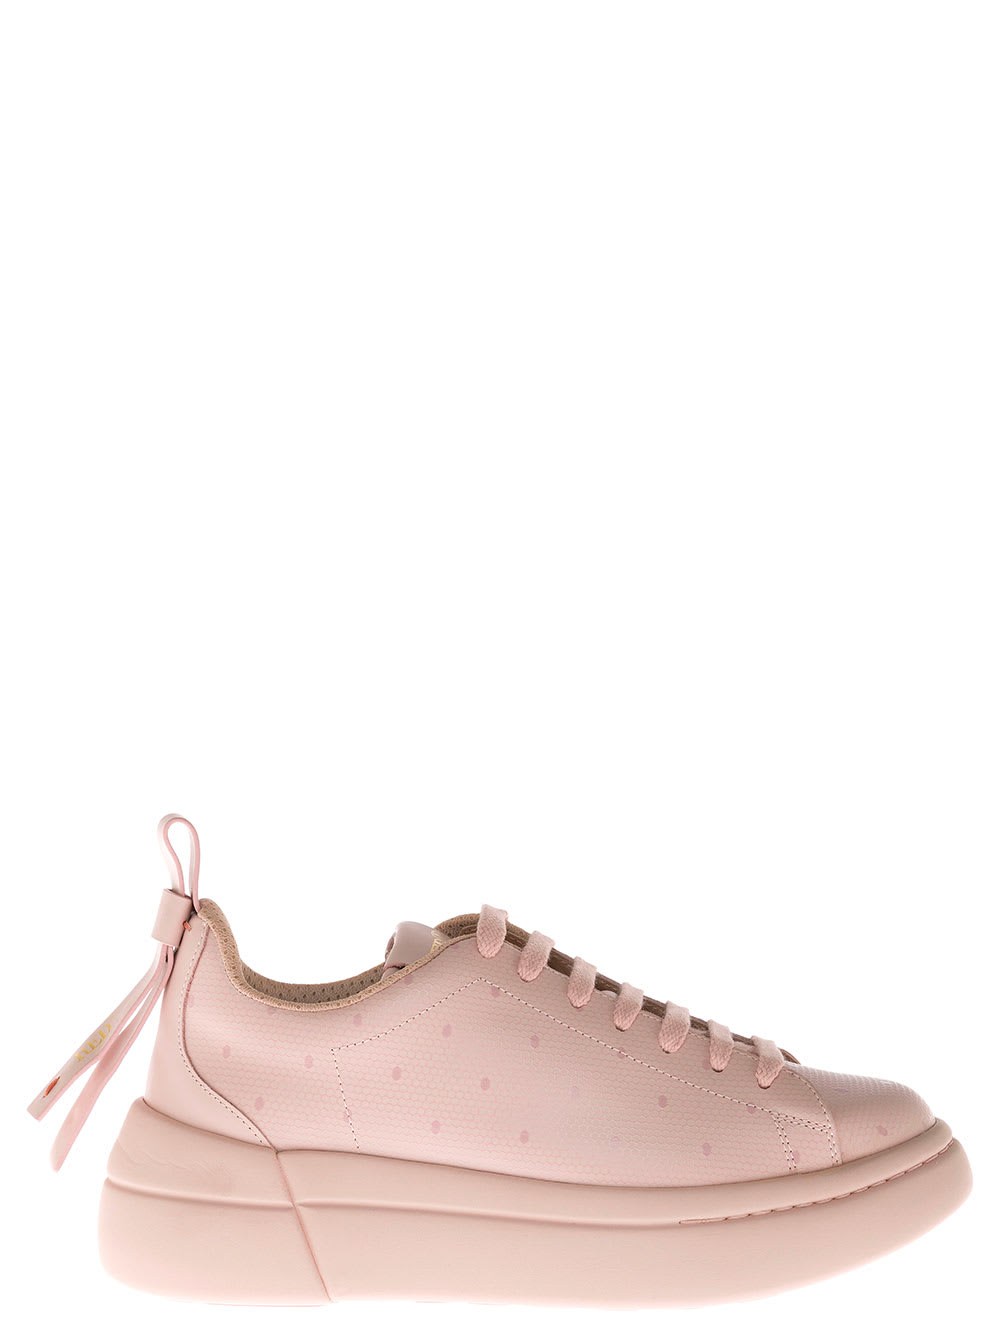 RED Valentino Bowalk Pink Leather Snaekers